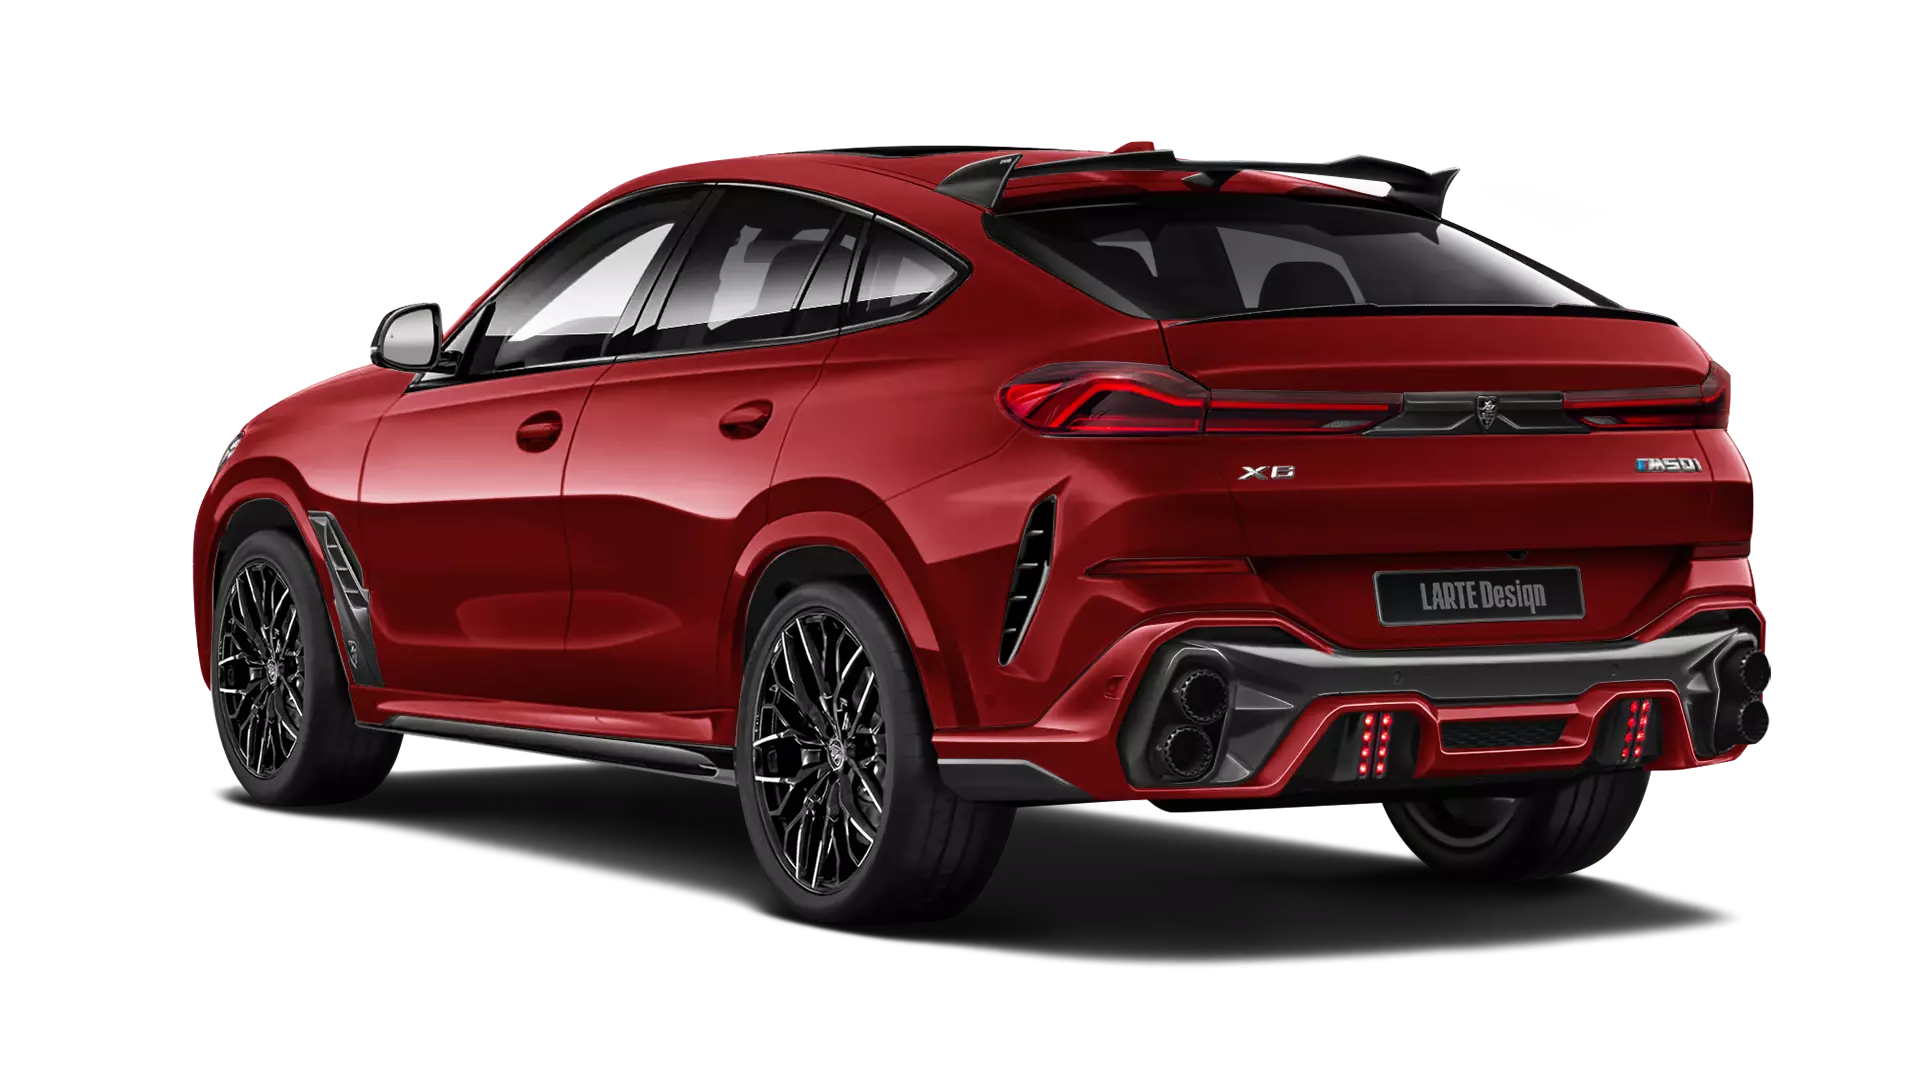 BMW X6 with painted body kit: rear view shown in flamenco red